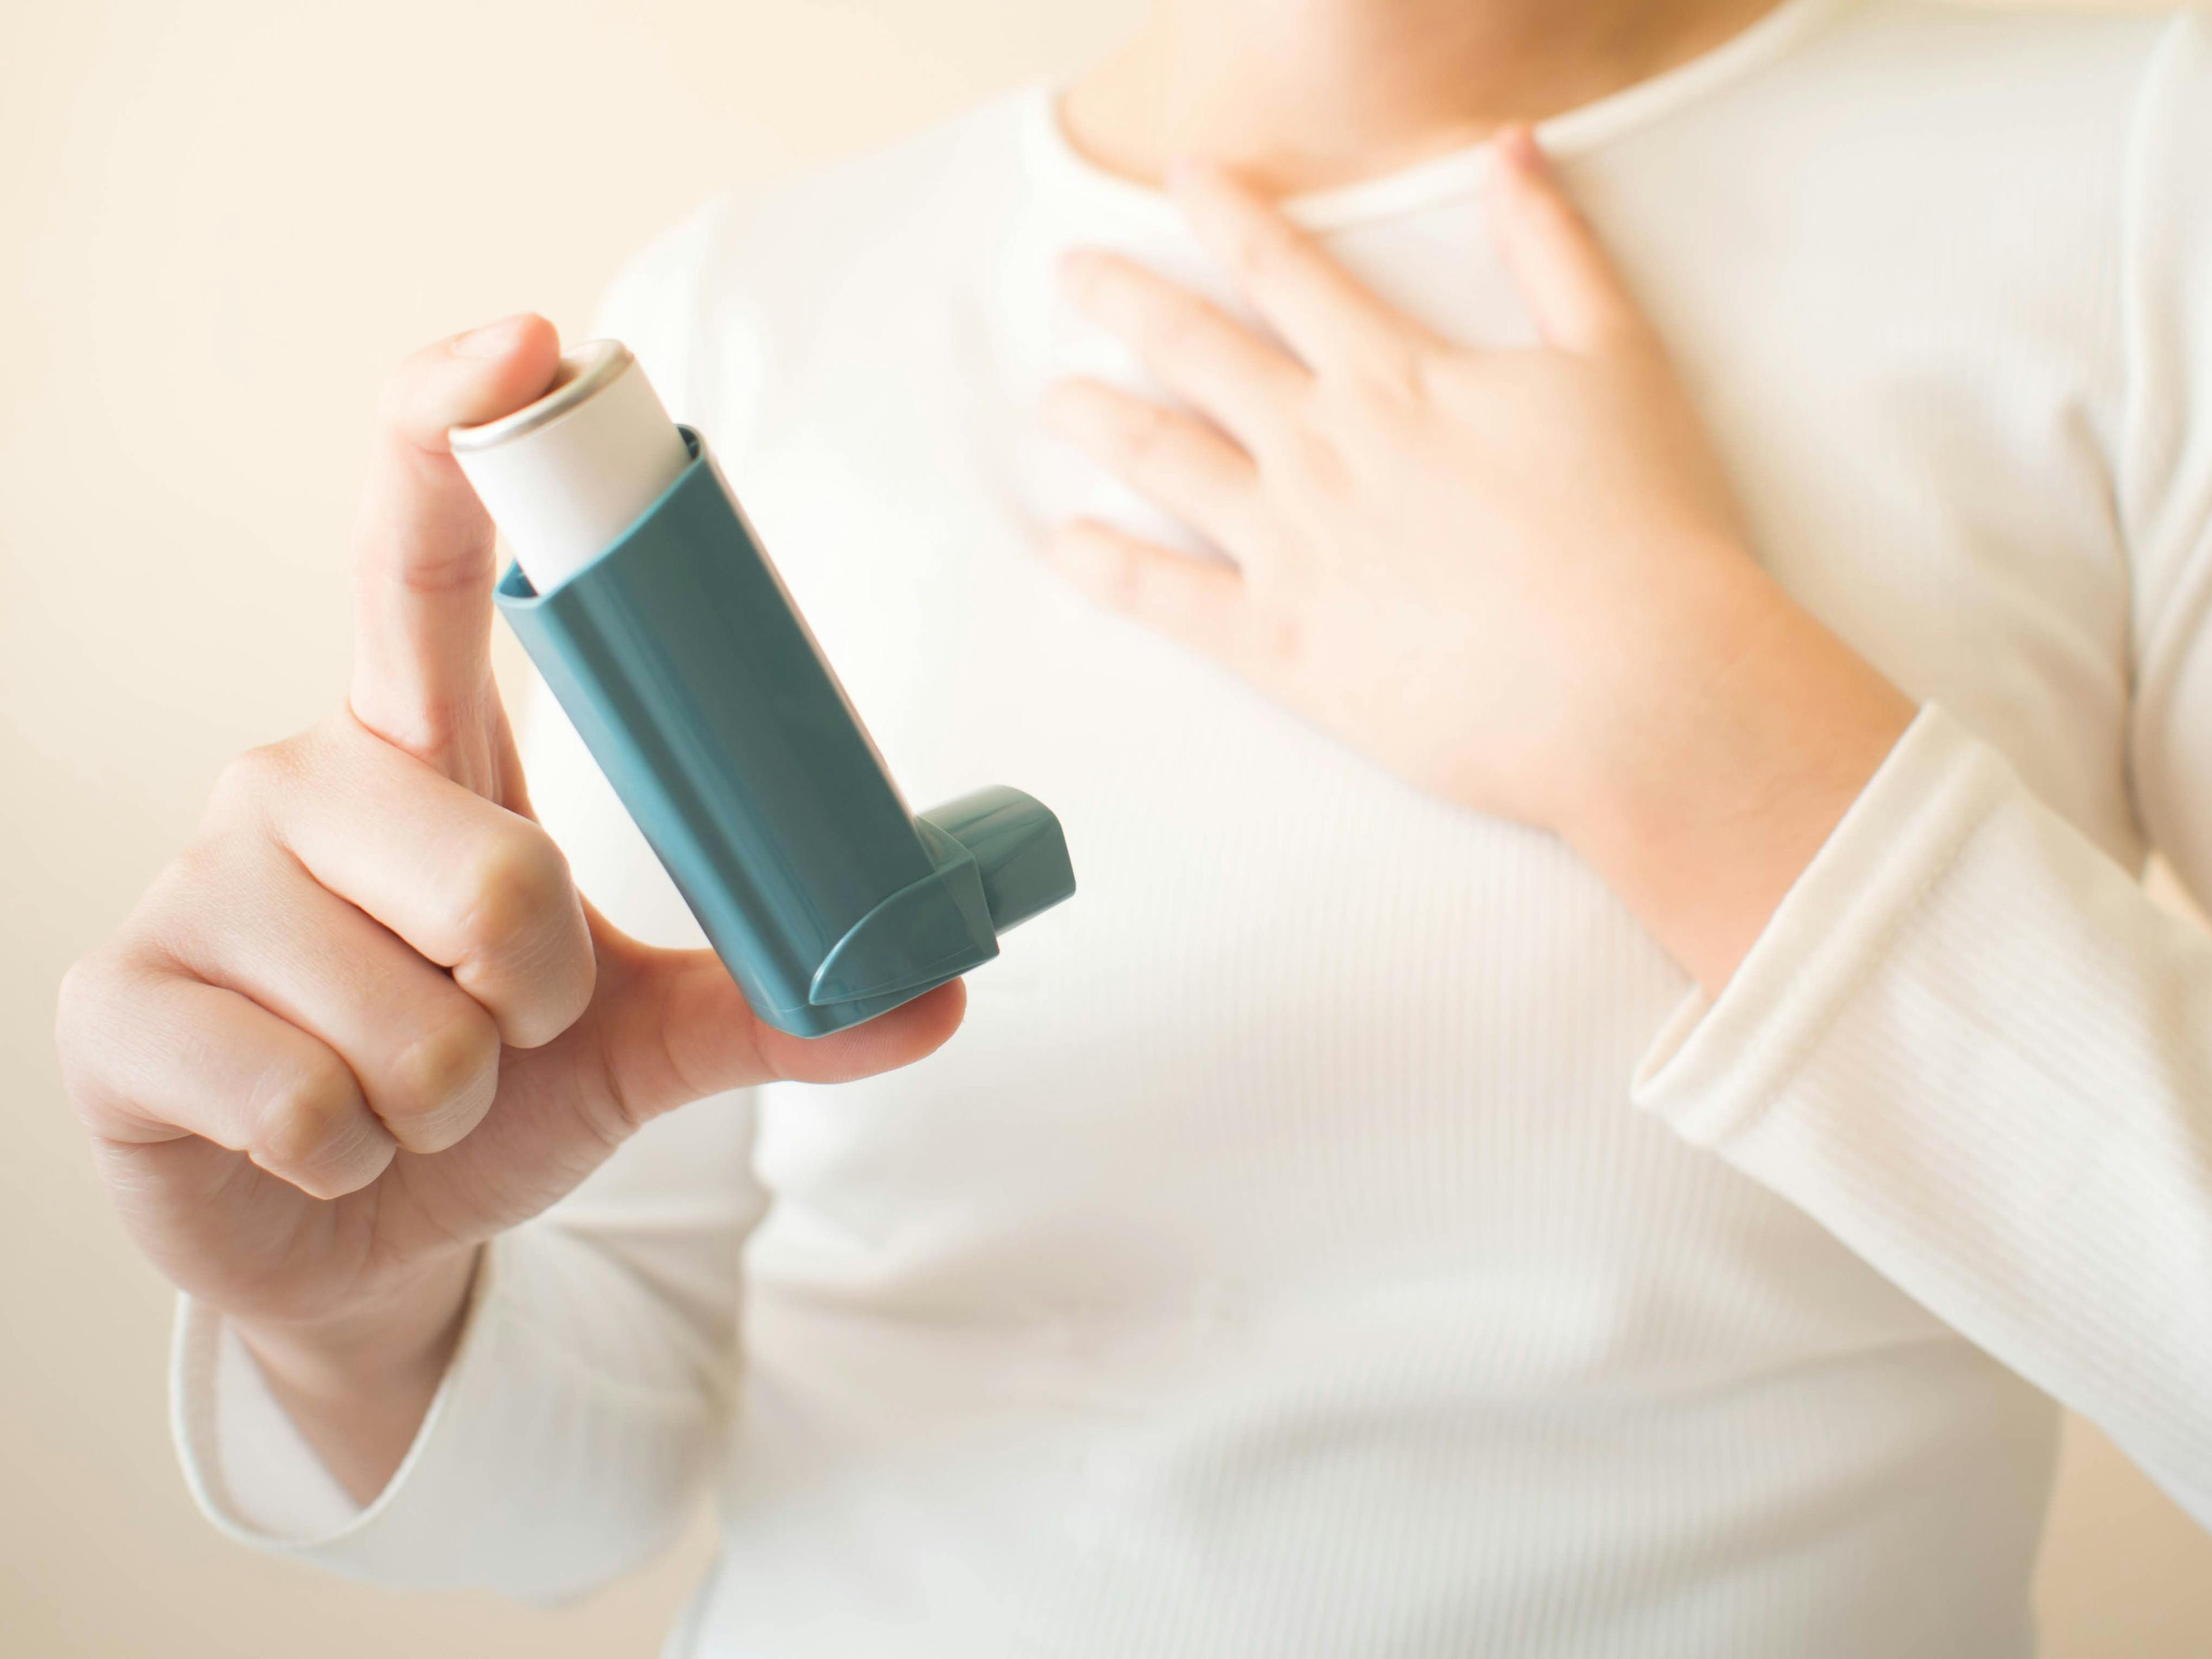 High COVID-19-related Anxiety a Risk Factor for Worsening of Asthma, Quality of Life